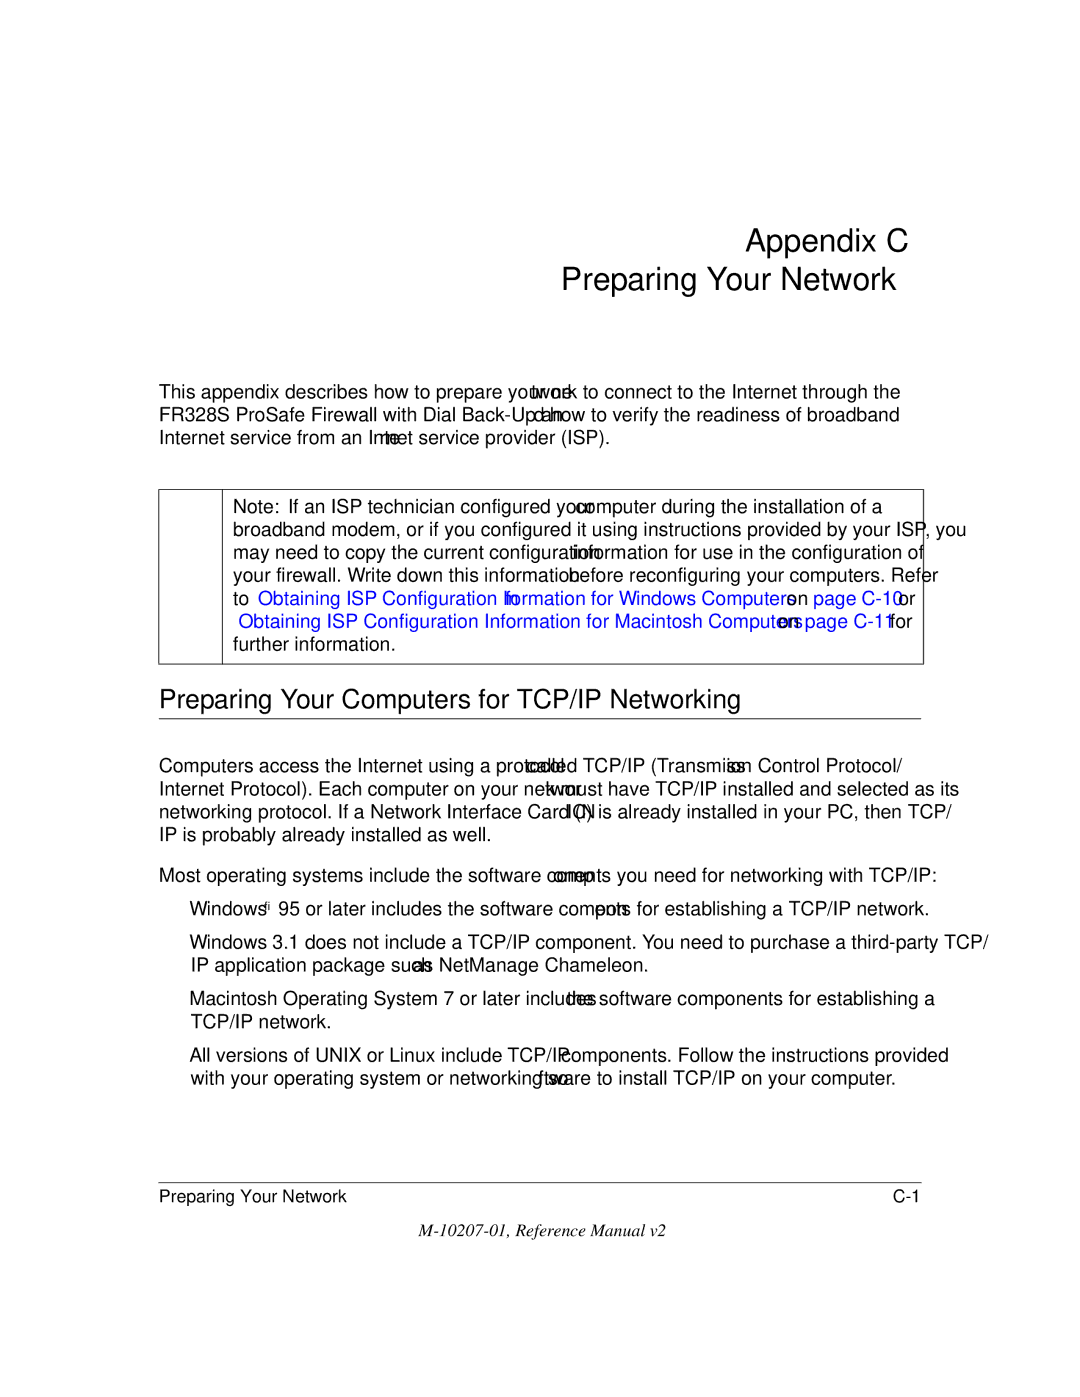 NETGEAR FR328S manual Appendix C Preparing Your Network, Preparing Your Computers for TCP/IP Networking 